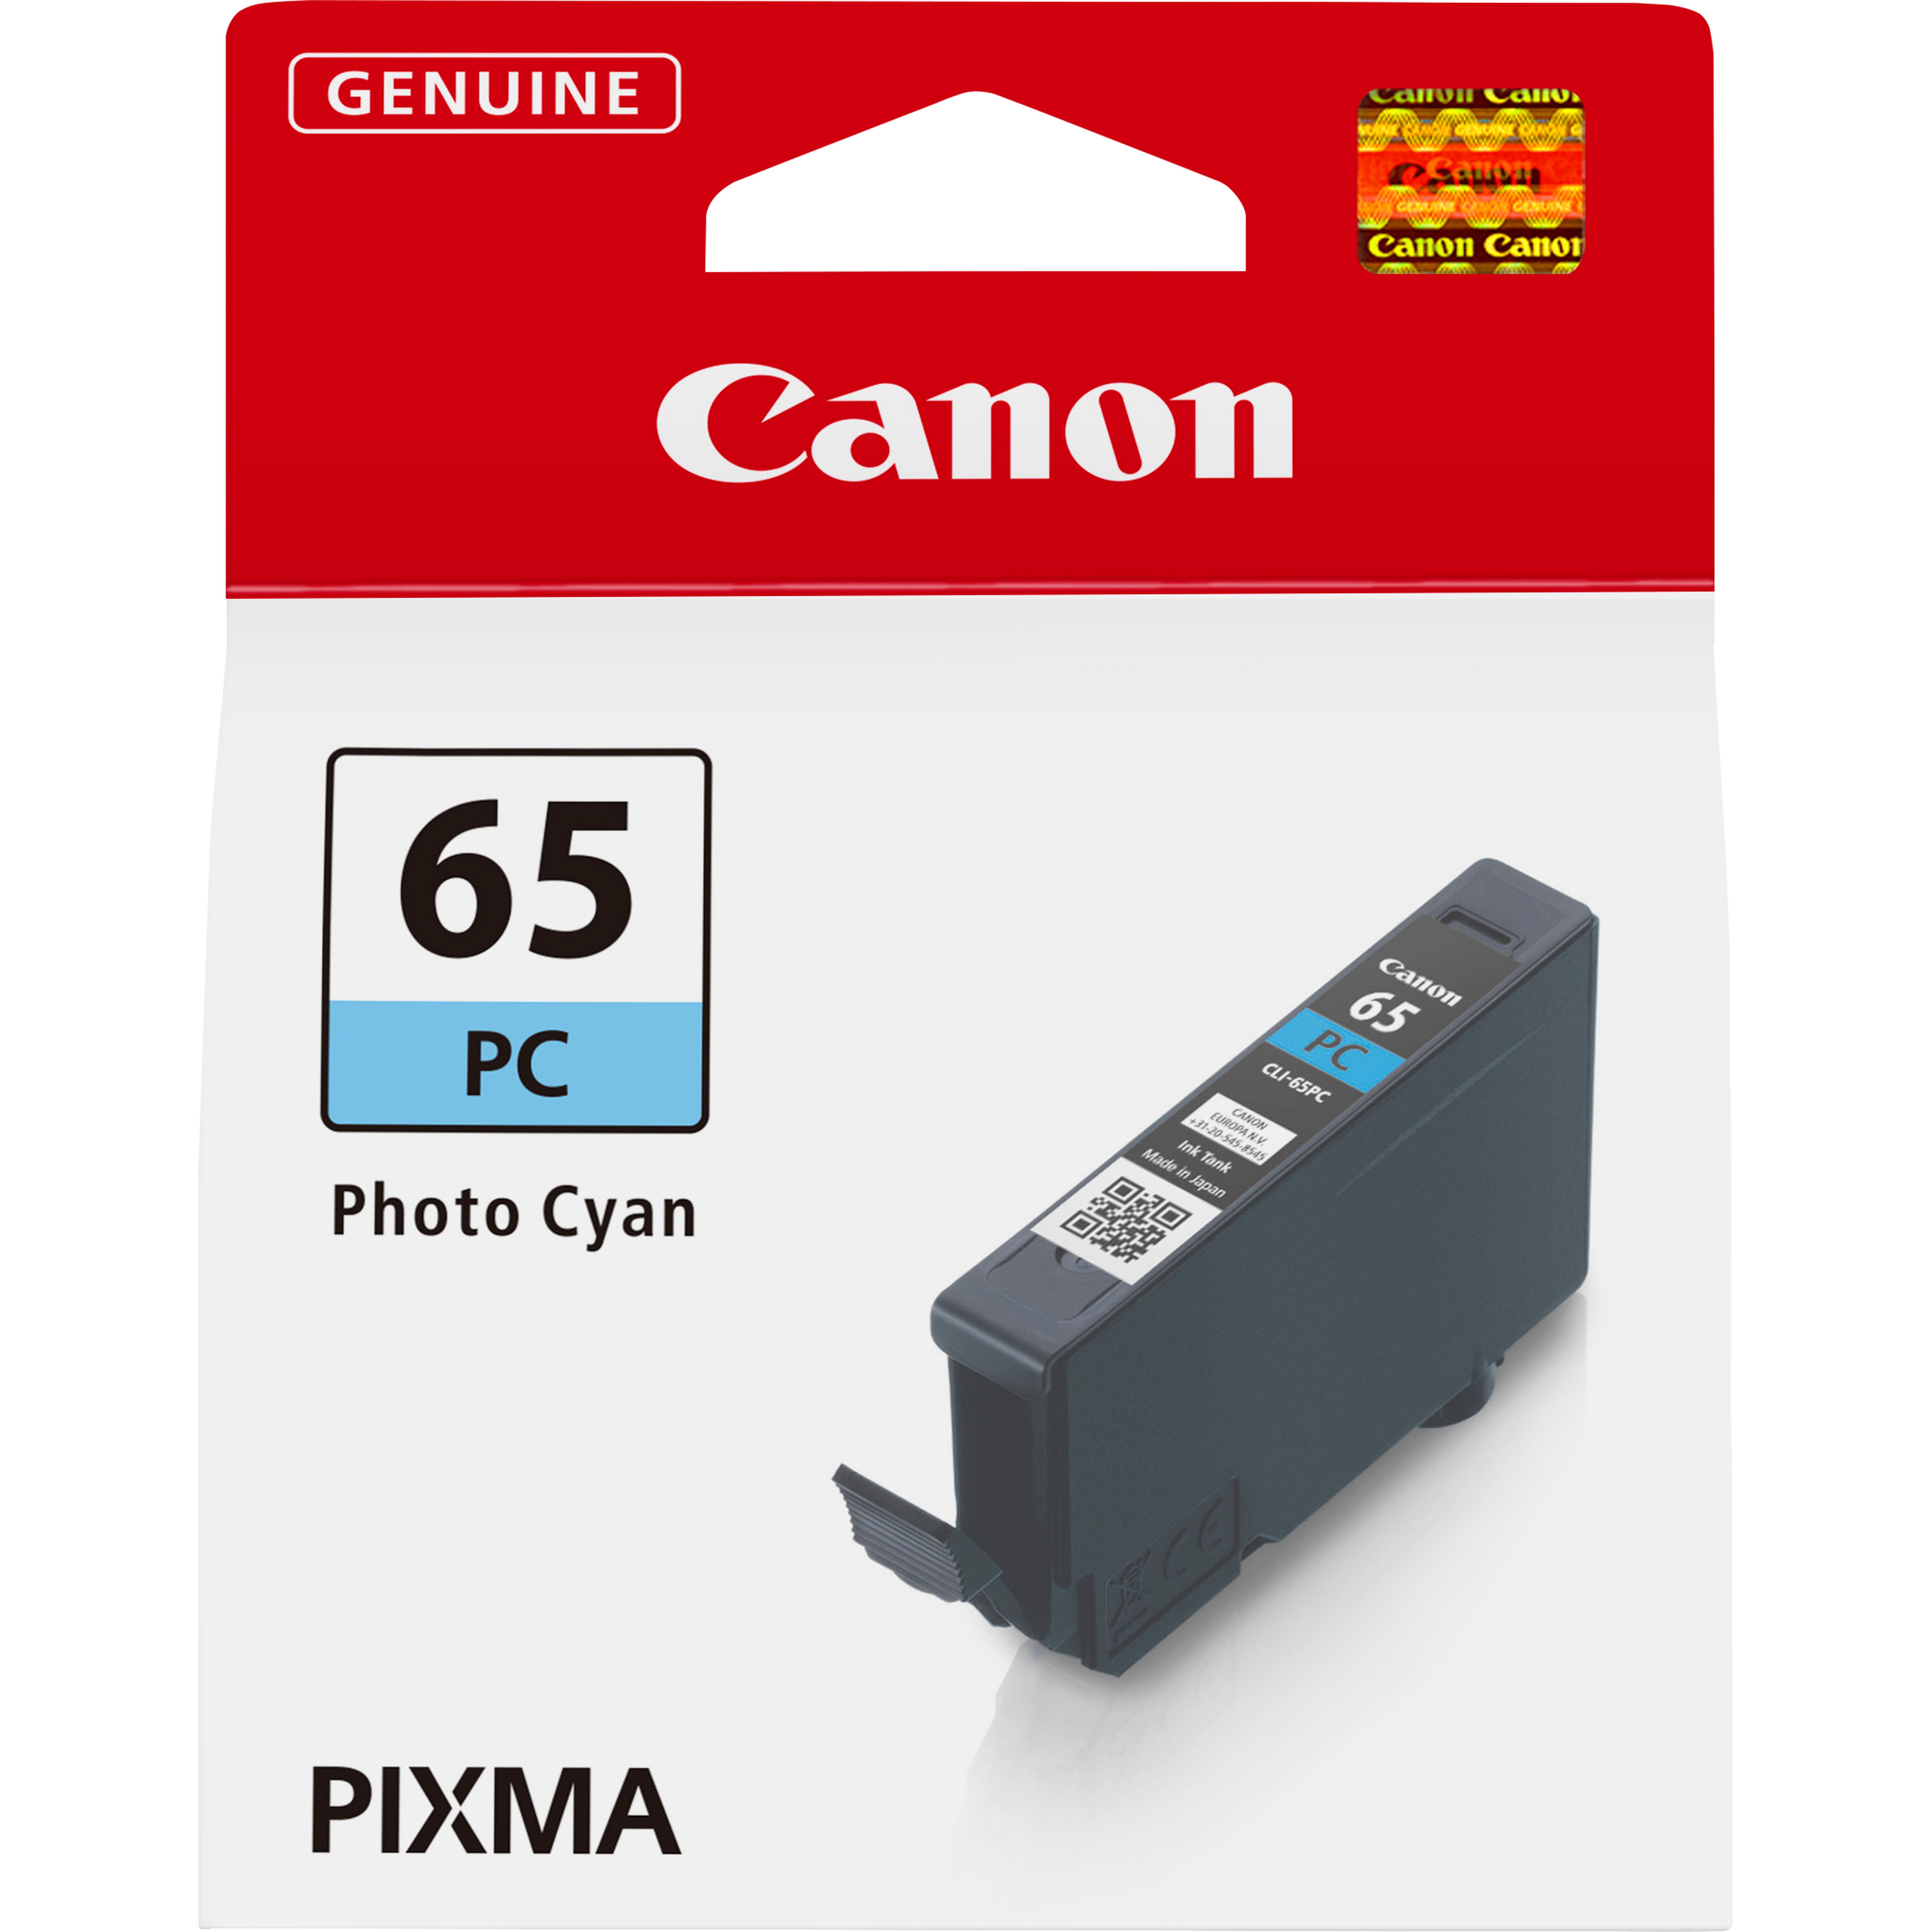 Canon 4220C001 single pack / cyaan